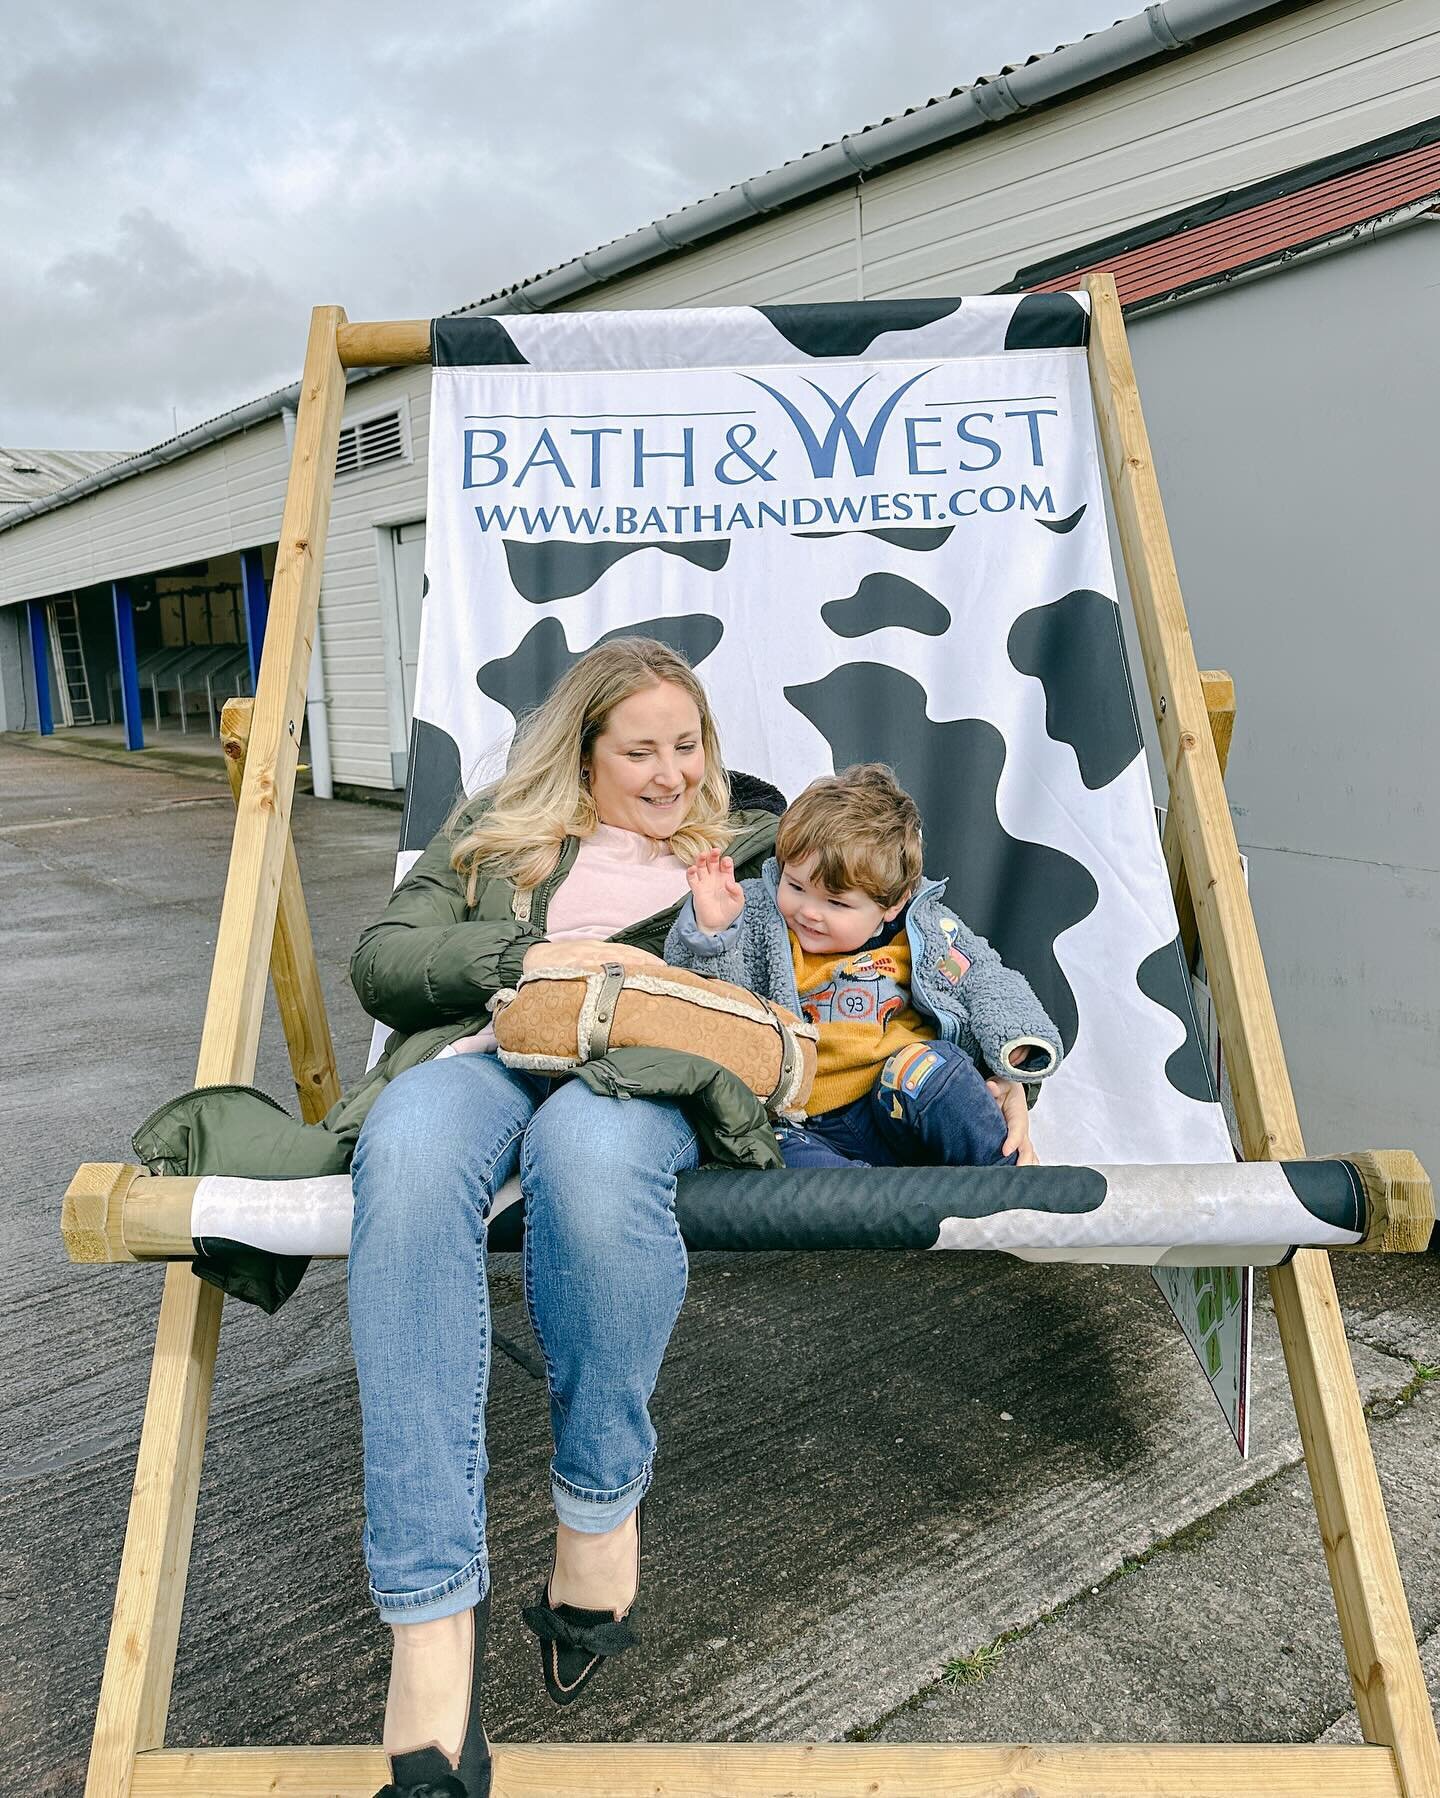 Wandered through The Food &amp; Drink Festival at @royalbathandwest today, and oh, what a feast for the senses it was. Imagine every kind of treat you could dream of, from melt-in-your-mouth cheeses to local gins and bakes that had us going back for,